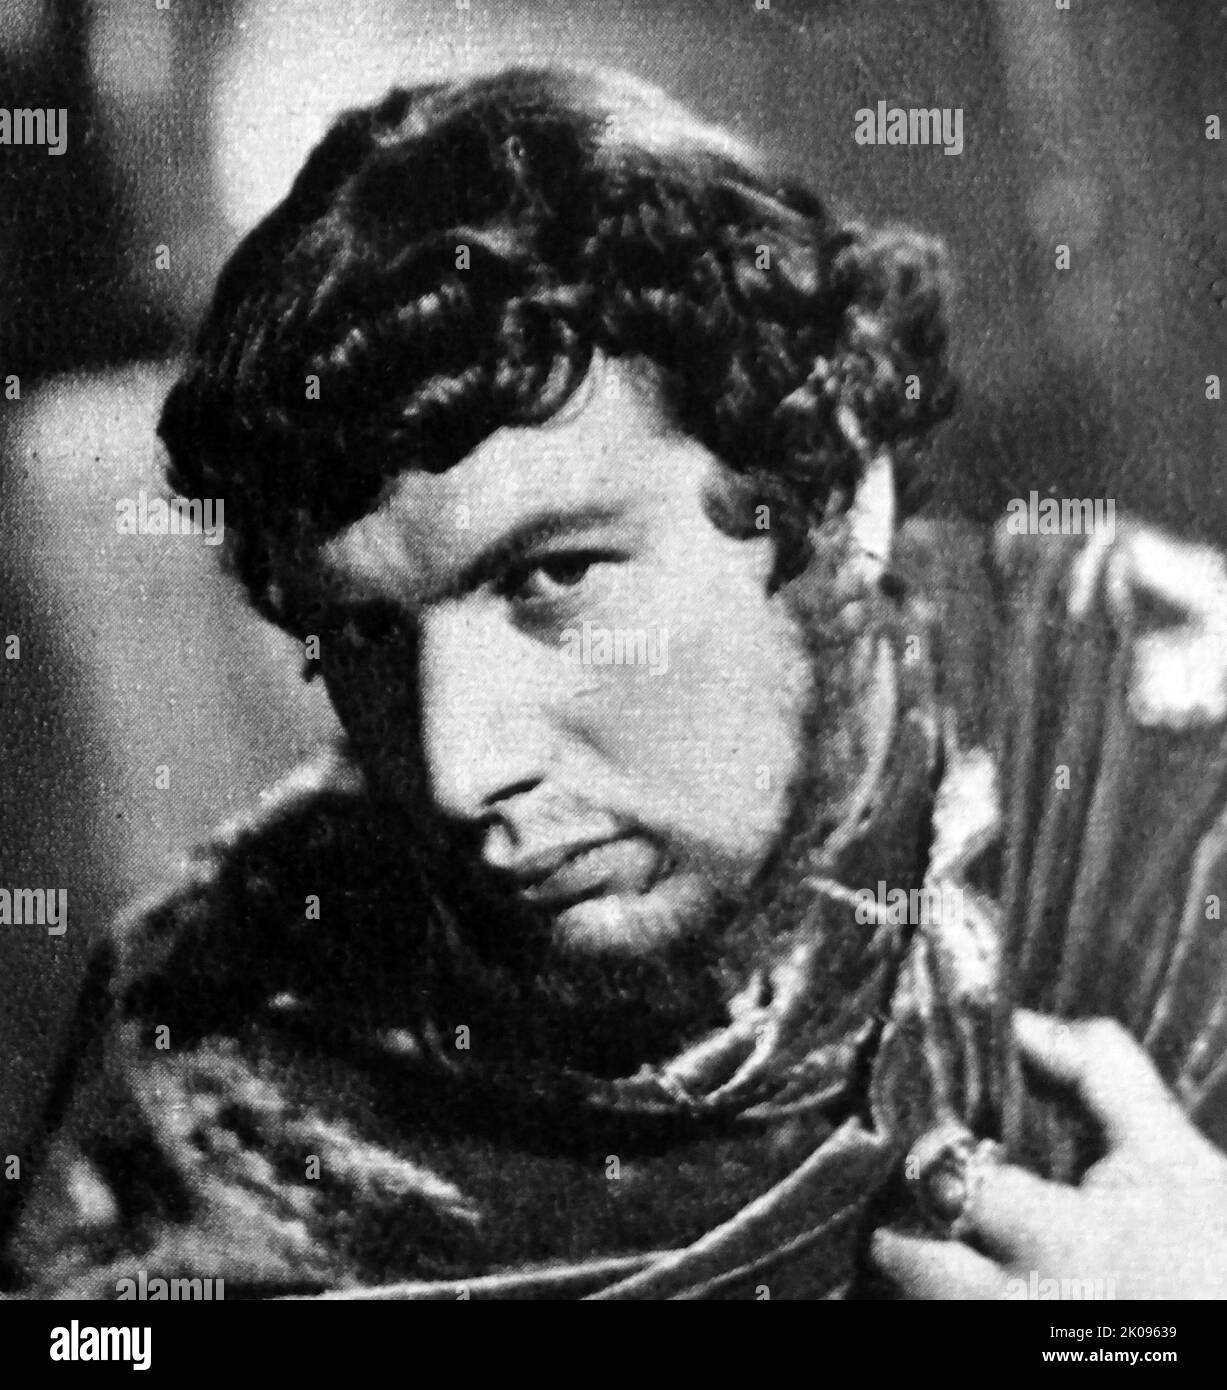 Peter Ustinov in Quo Vadis, a 1951 American epic historical drama film. Sir Peter Alexander von Ustinov CBE FRSA (16 April 1921 - 28 March 2004) was a British actor, filmmaker and writer. He was a fixture on television talk shows and lecture circuits for much of his career. An intellectual and diplomat, he held various academic posts and served as a goodwill ambassador for UNICEF and president of the World Federalist Movement. Stock Photo